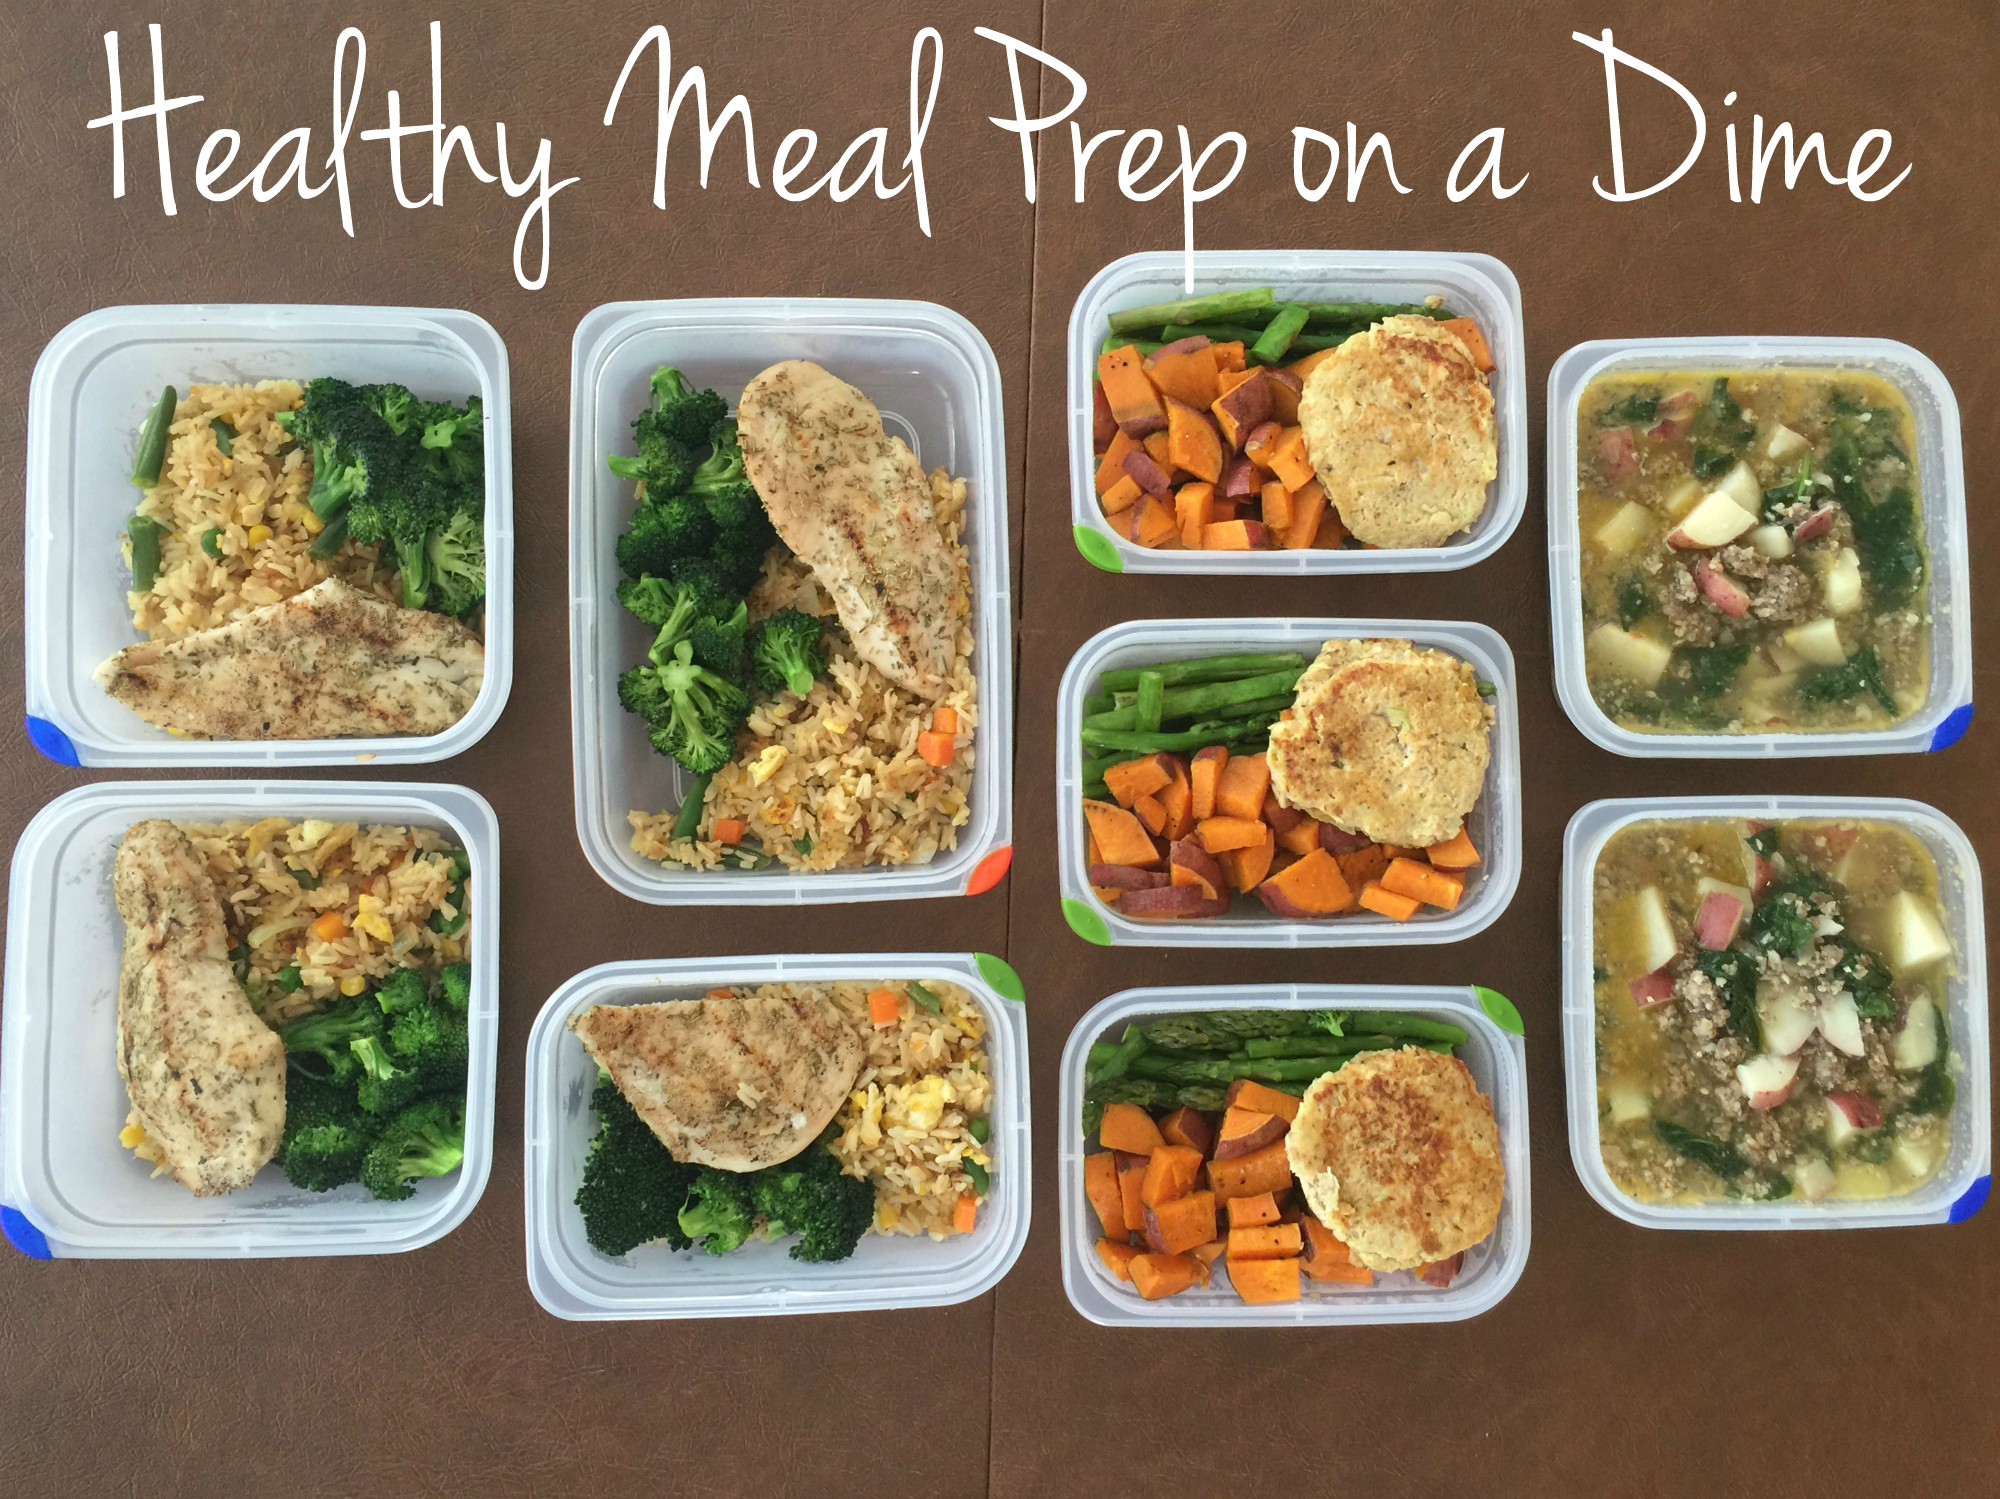 Low Calorie Meal Prep Recipes
 Healthy Meal Prep on a Dime sssyrah